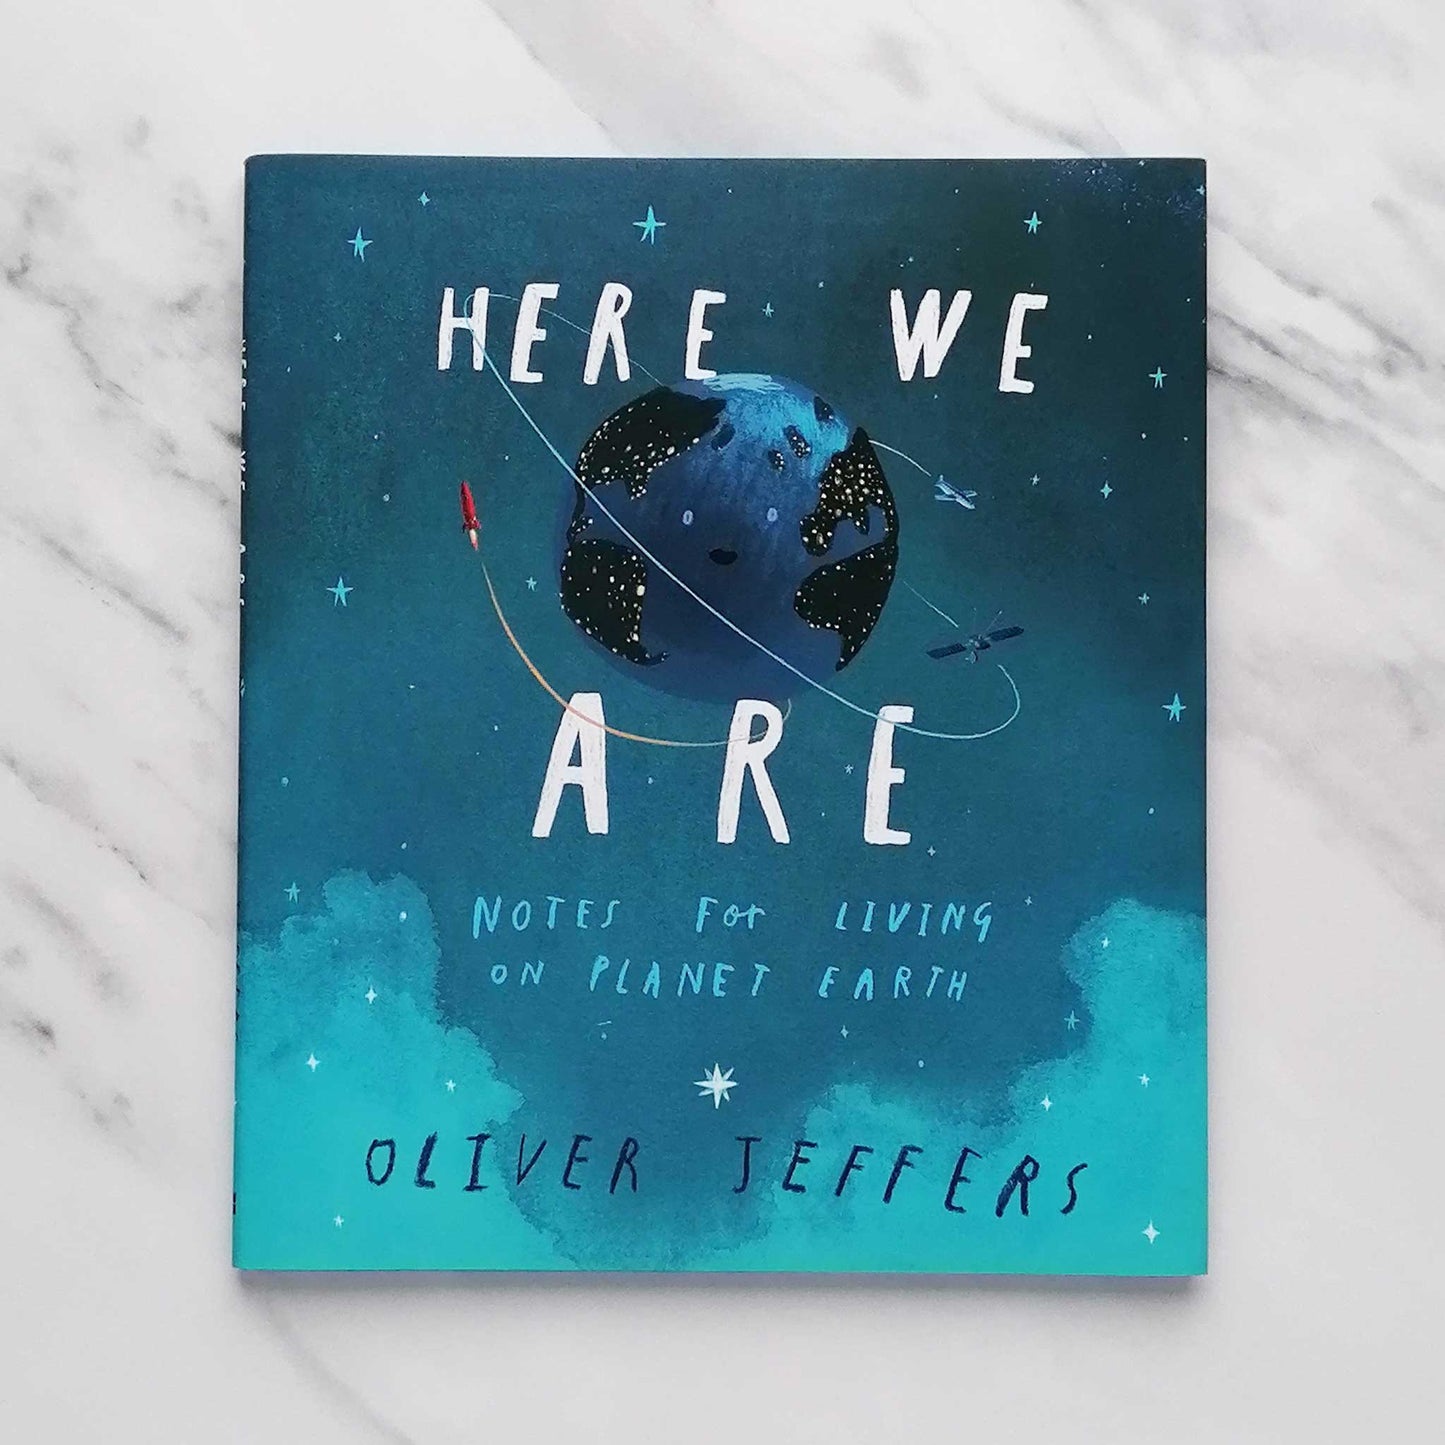 Our Bookshelf Print Books Here We Are : Notes for Living on Planet Earth by Oliver Jeffers